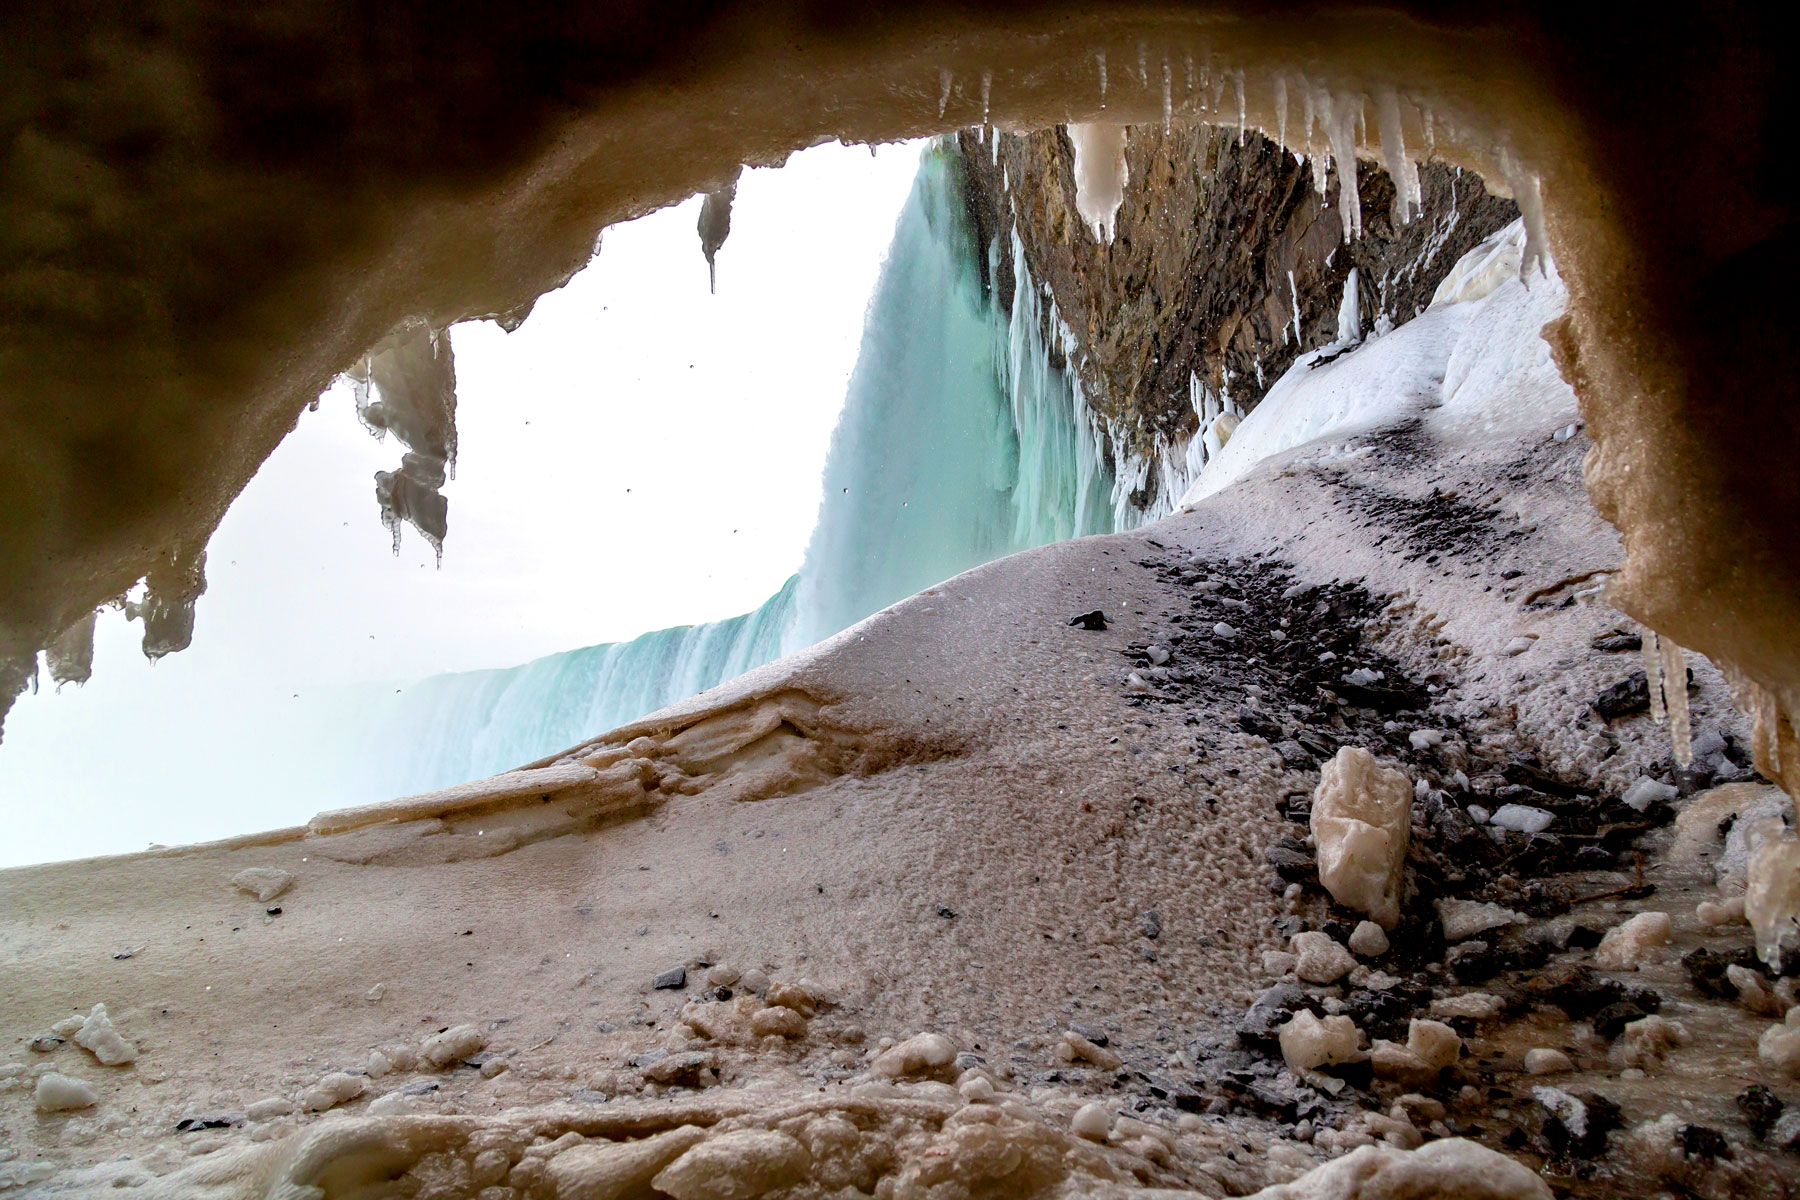 Looking through the ice cave behind Ontario's Niagara Falls as vapor rises over melting icicles